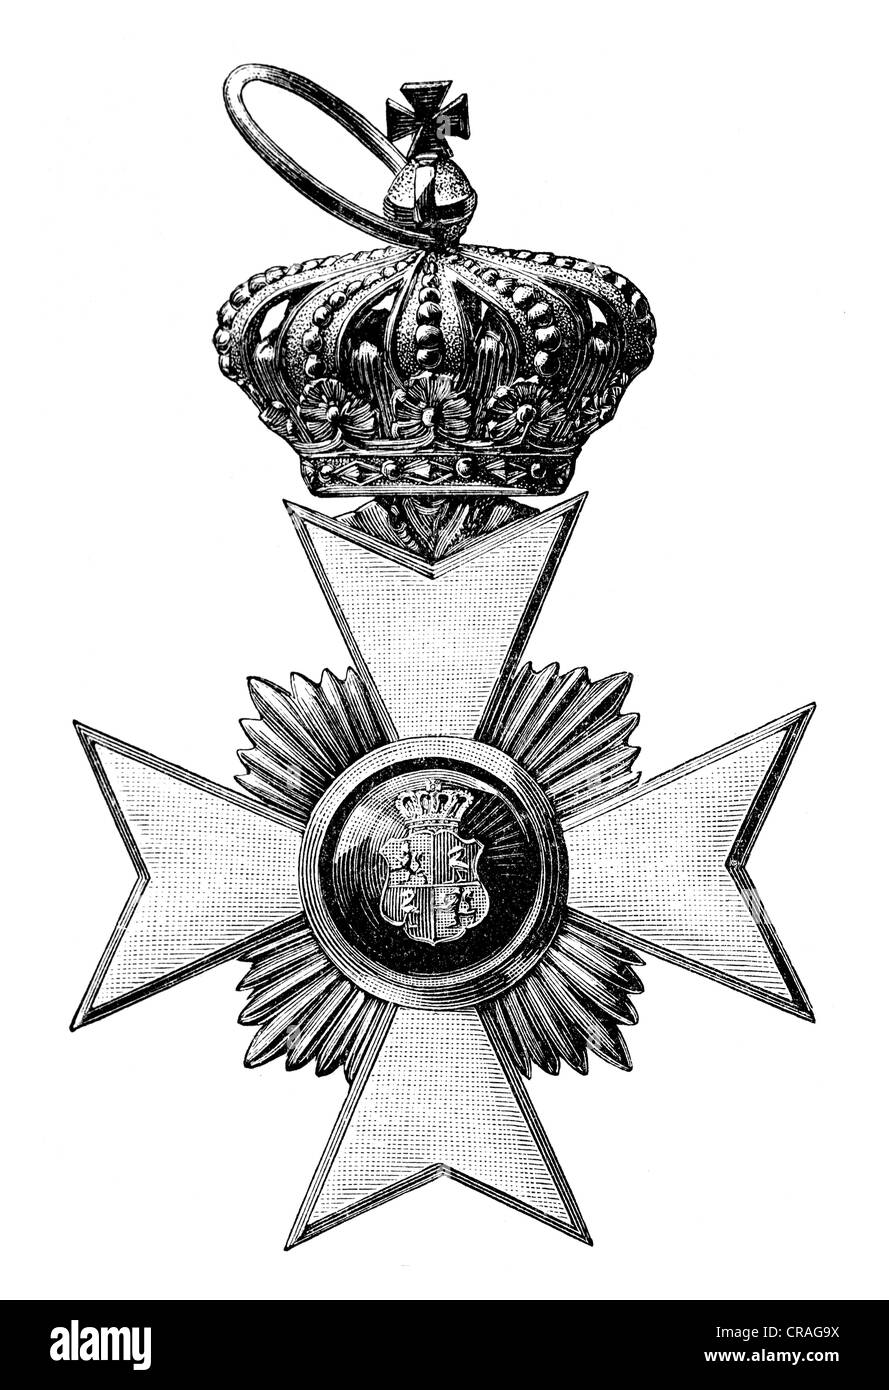 1st class cross of honour with a crown, Principality of Reuss, younger branch, from Meyers Konversationslexikon encyclopedia Stock Photo